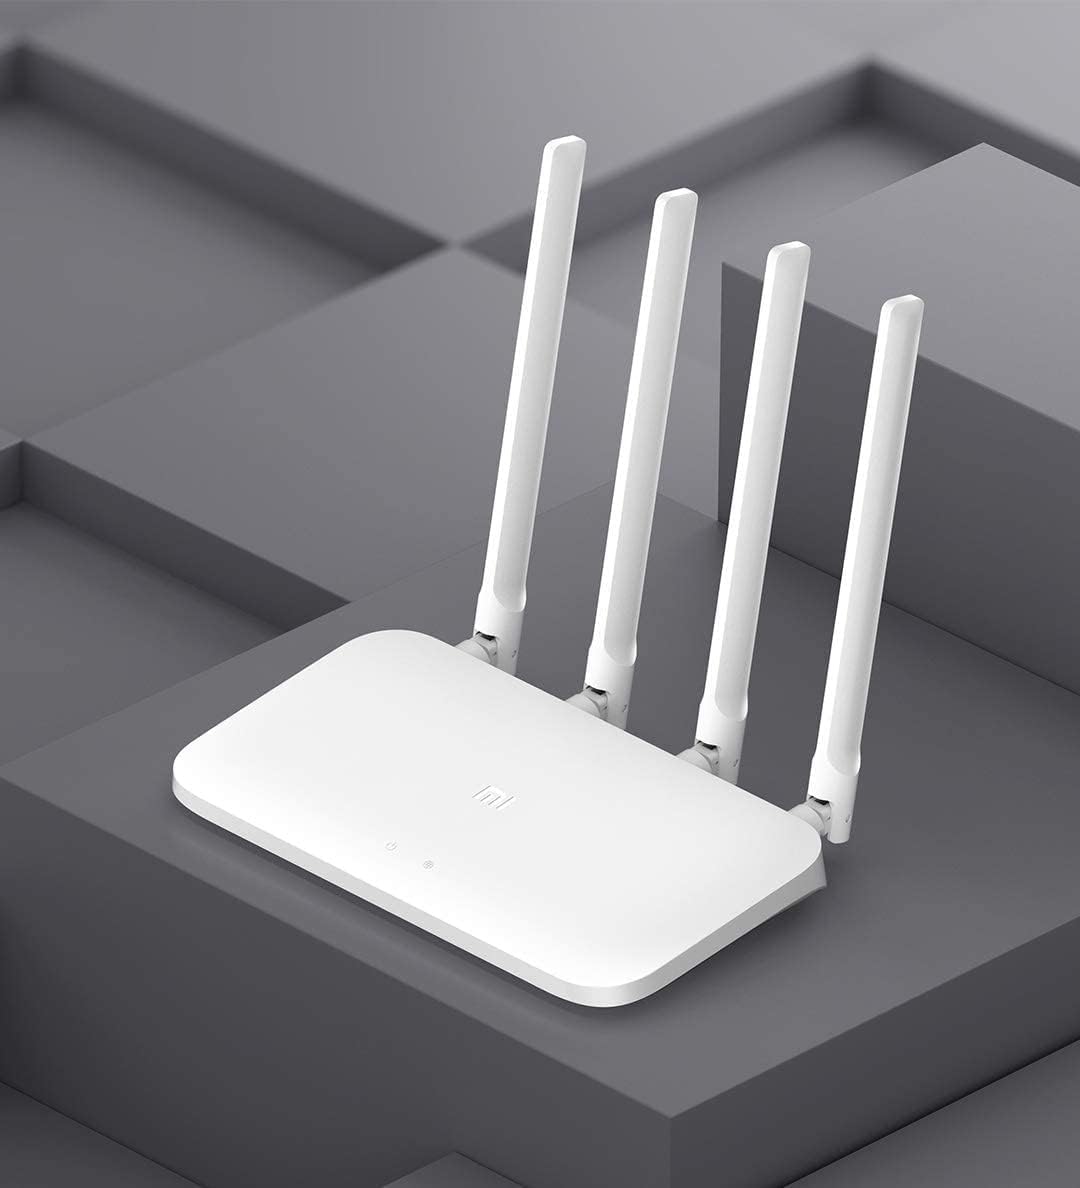 Xiaomi 4C 300 Mbps High Speed Wi-Fi Router, White - 34294